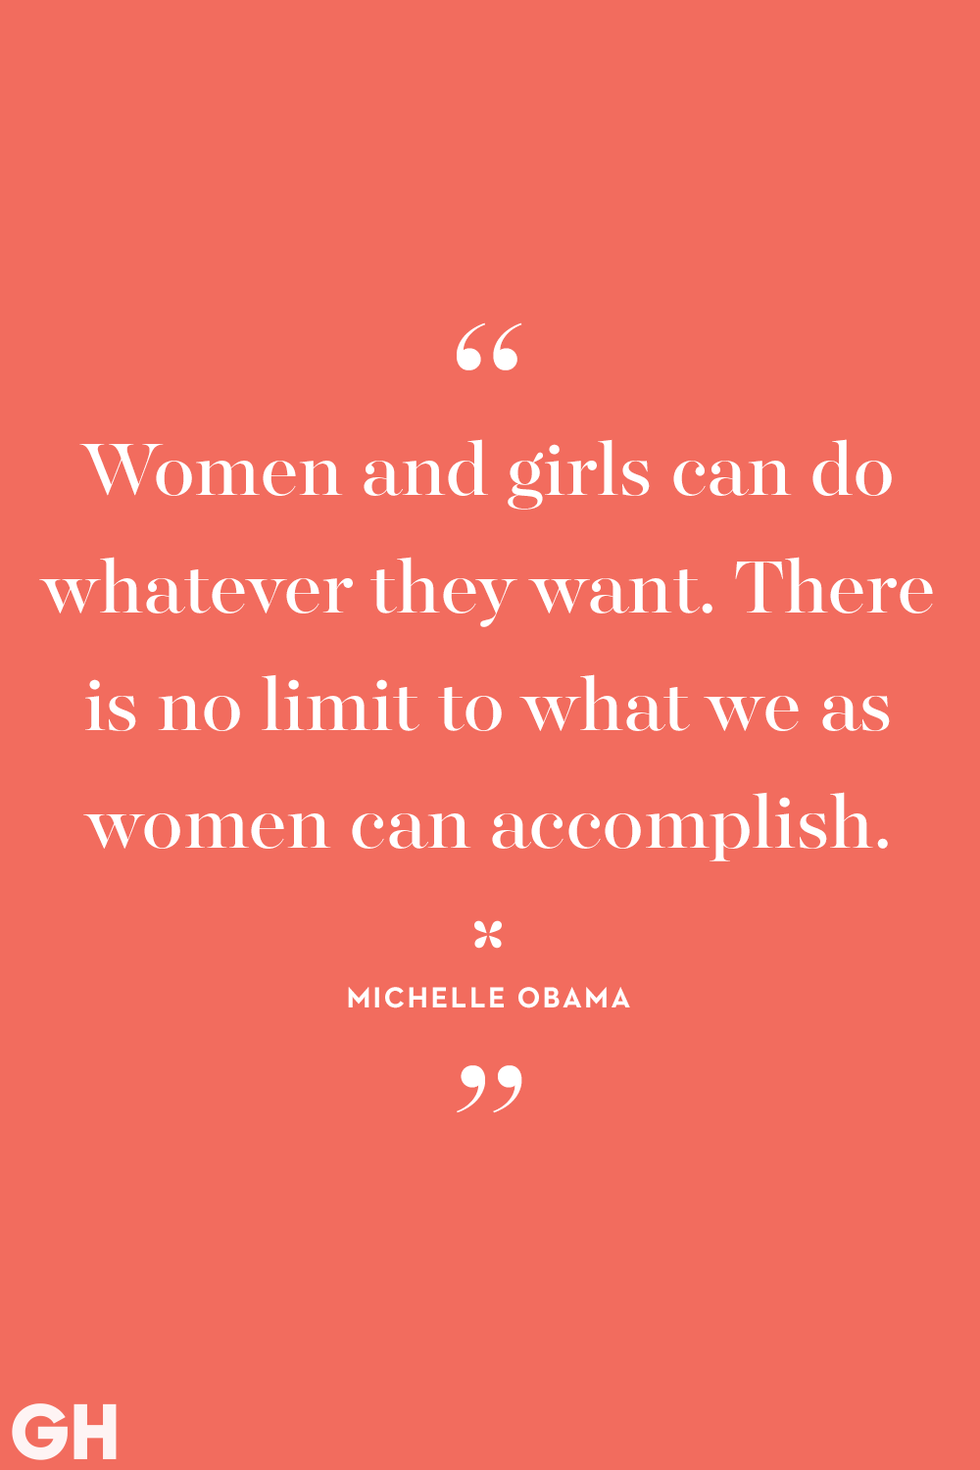 International Women's Day Messages to Celebrate Female Empowerment